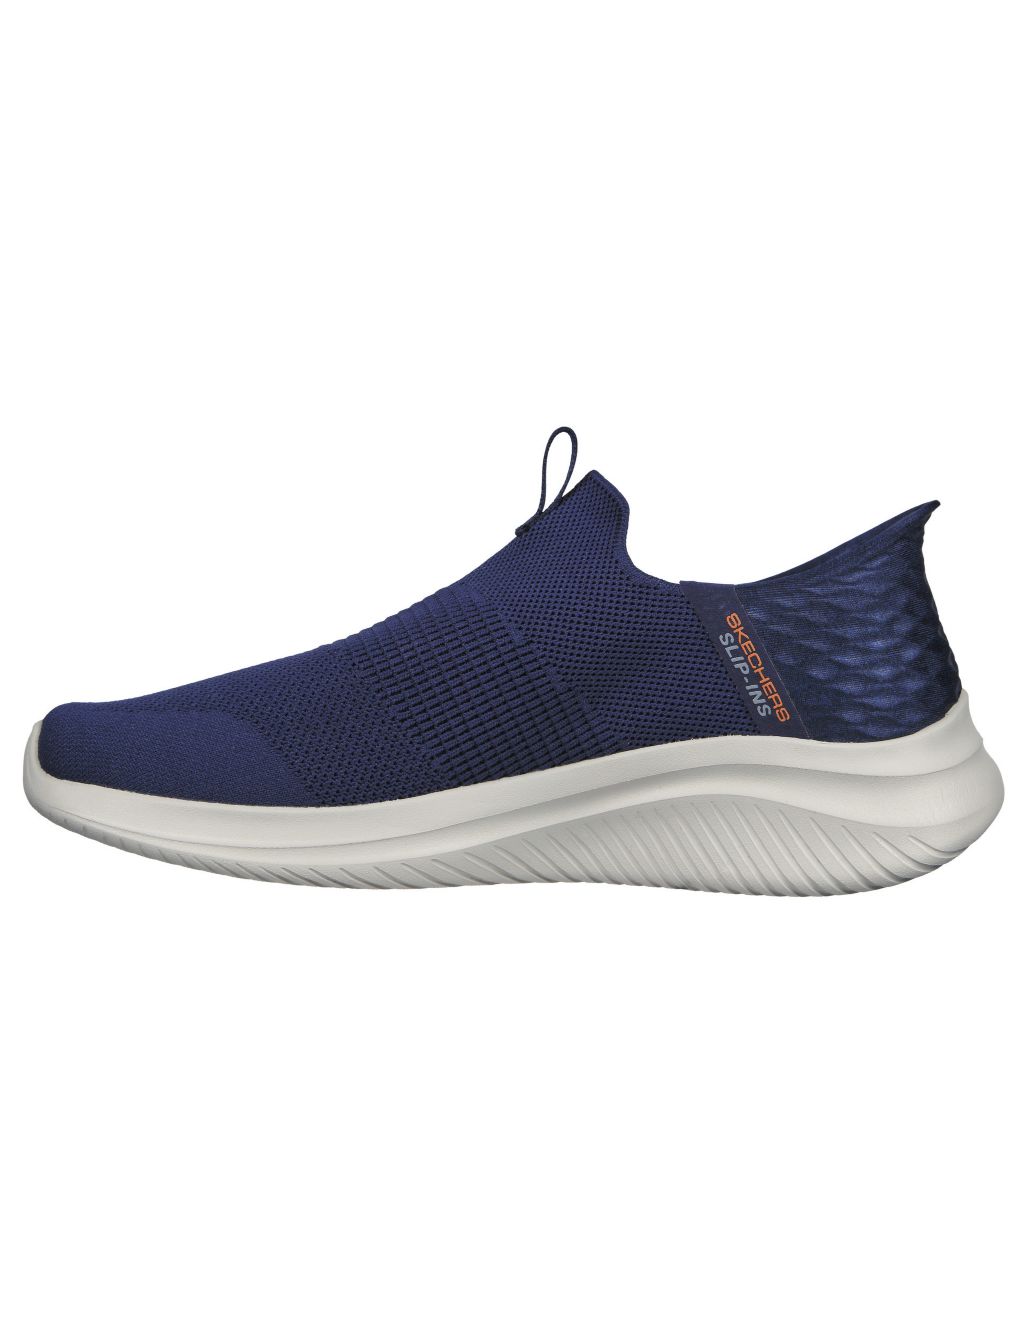 Ultra Flex 3.0 Smooth Step Wide Fit Trainers image 4